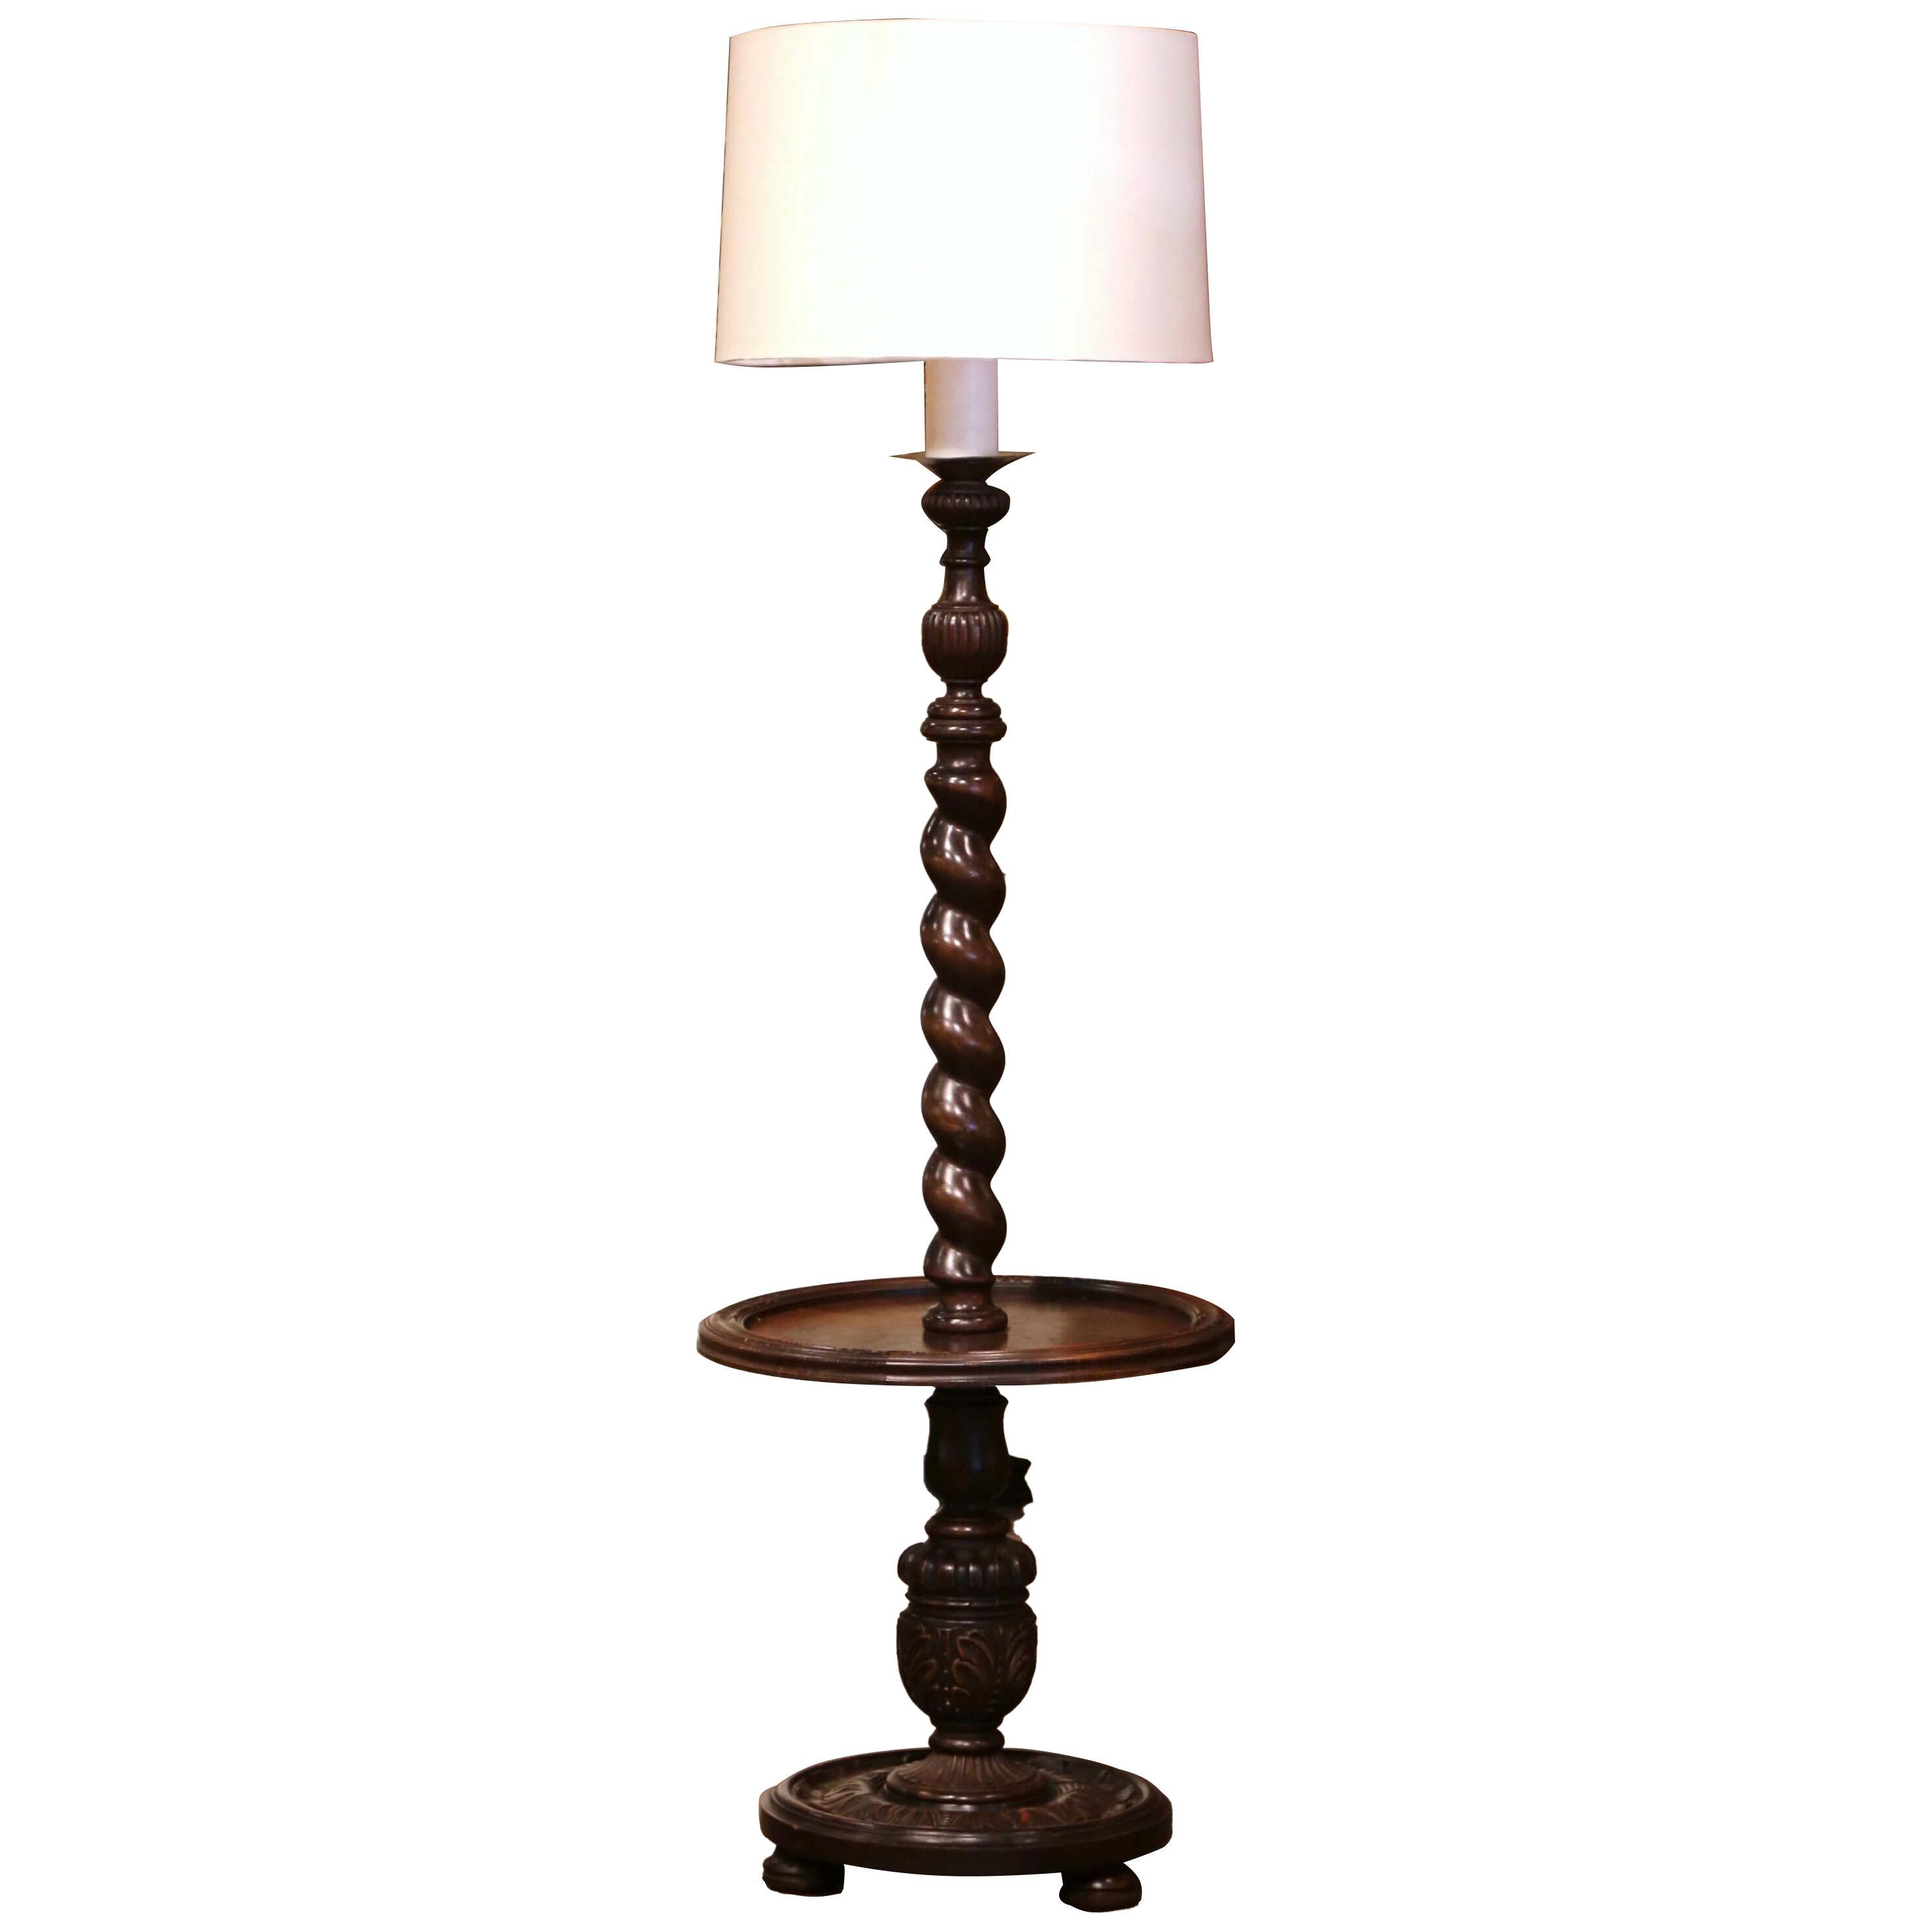 Mid-Century French Carved Barley Twist Two-Light Floor Lamp with Attached Table